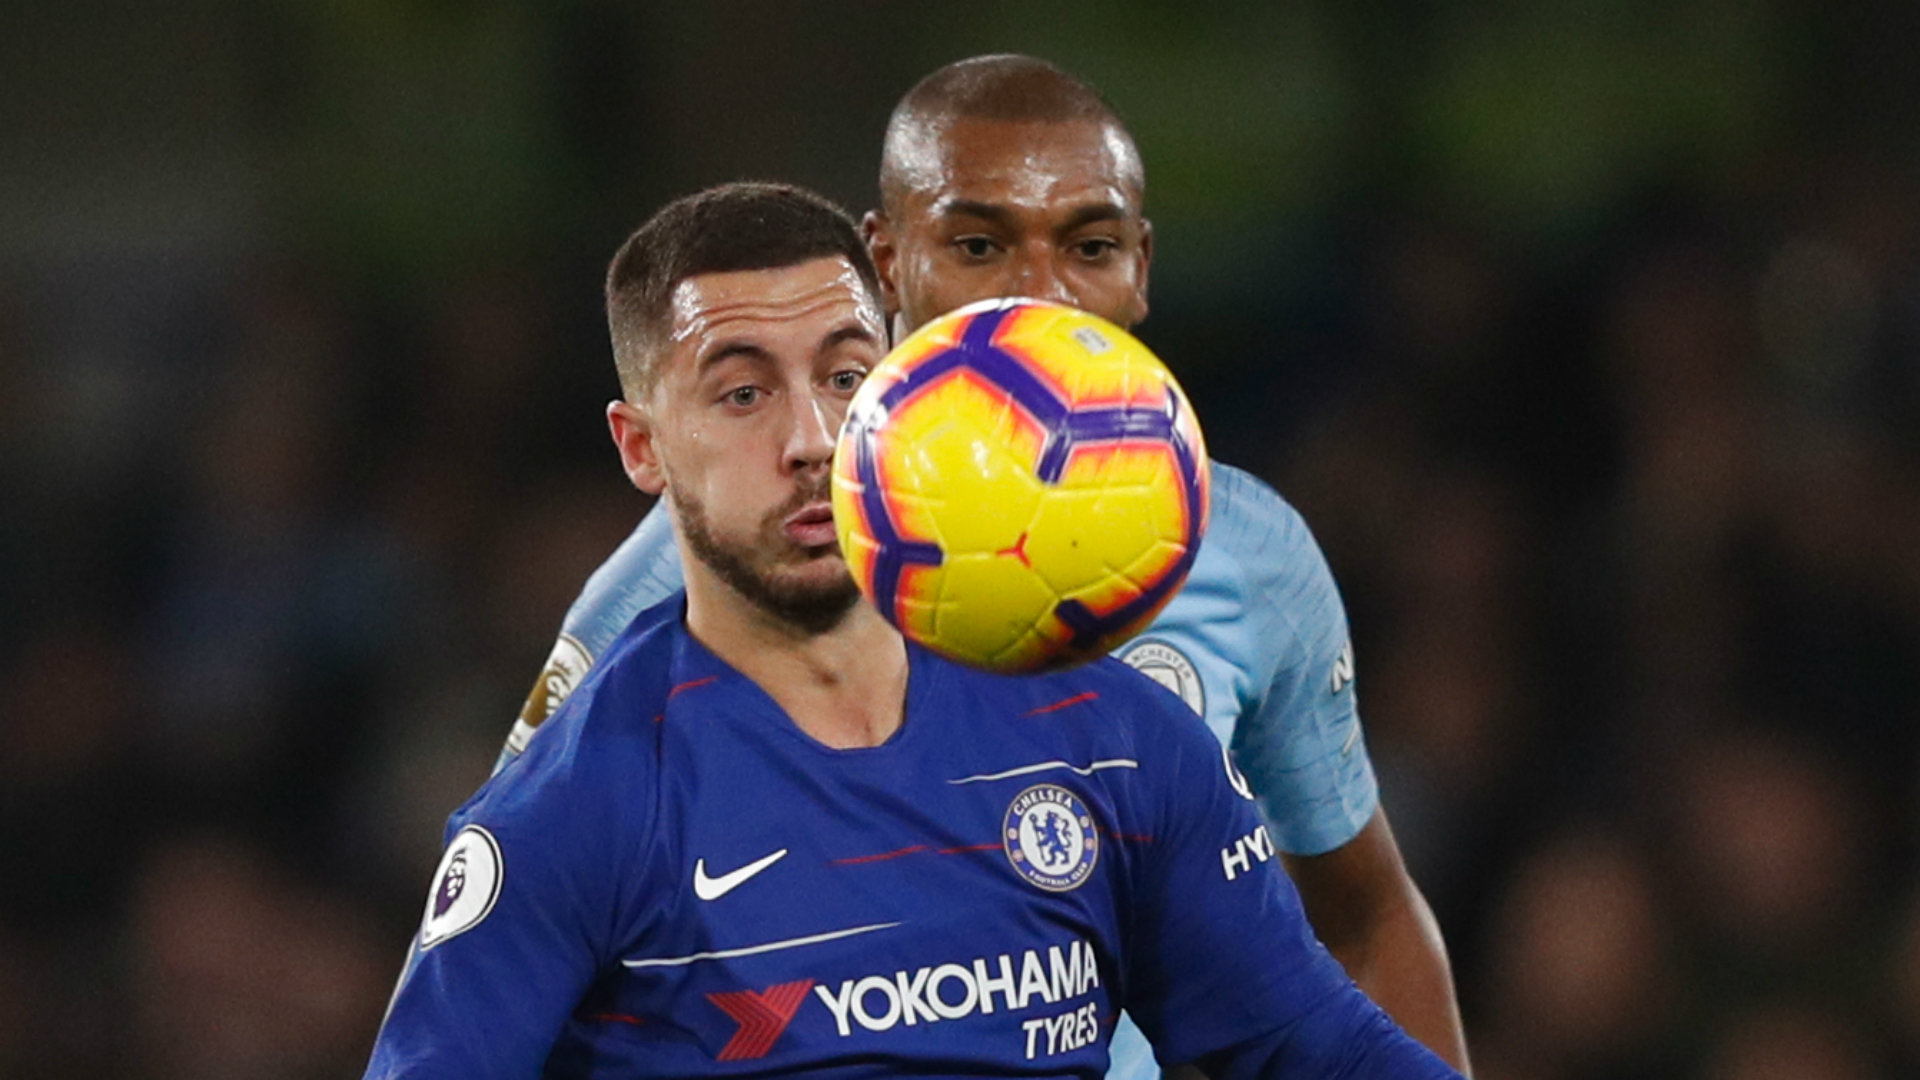 Despite his Chelsea side ending Manchester City's unbeaten run in the Premier League, Eden Hazard feels they remain the team to beat.